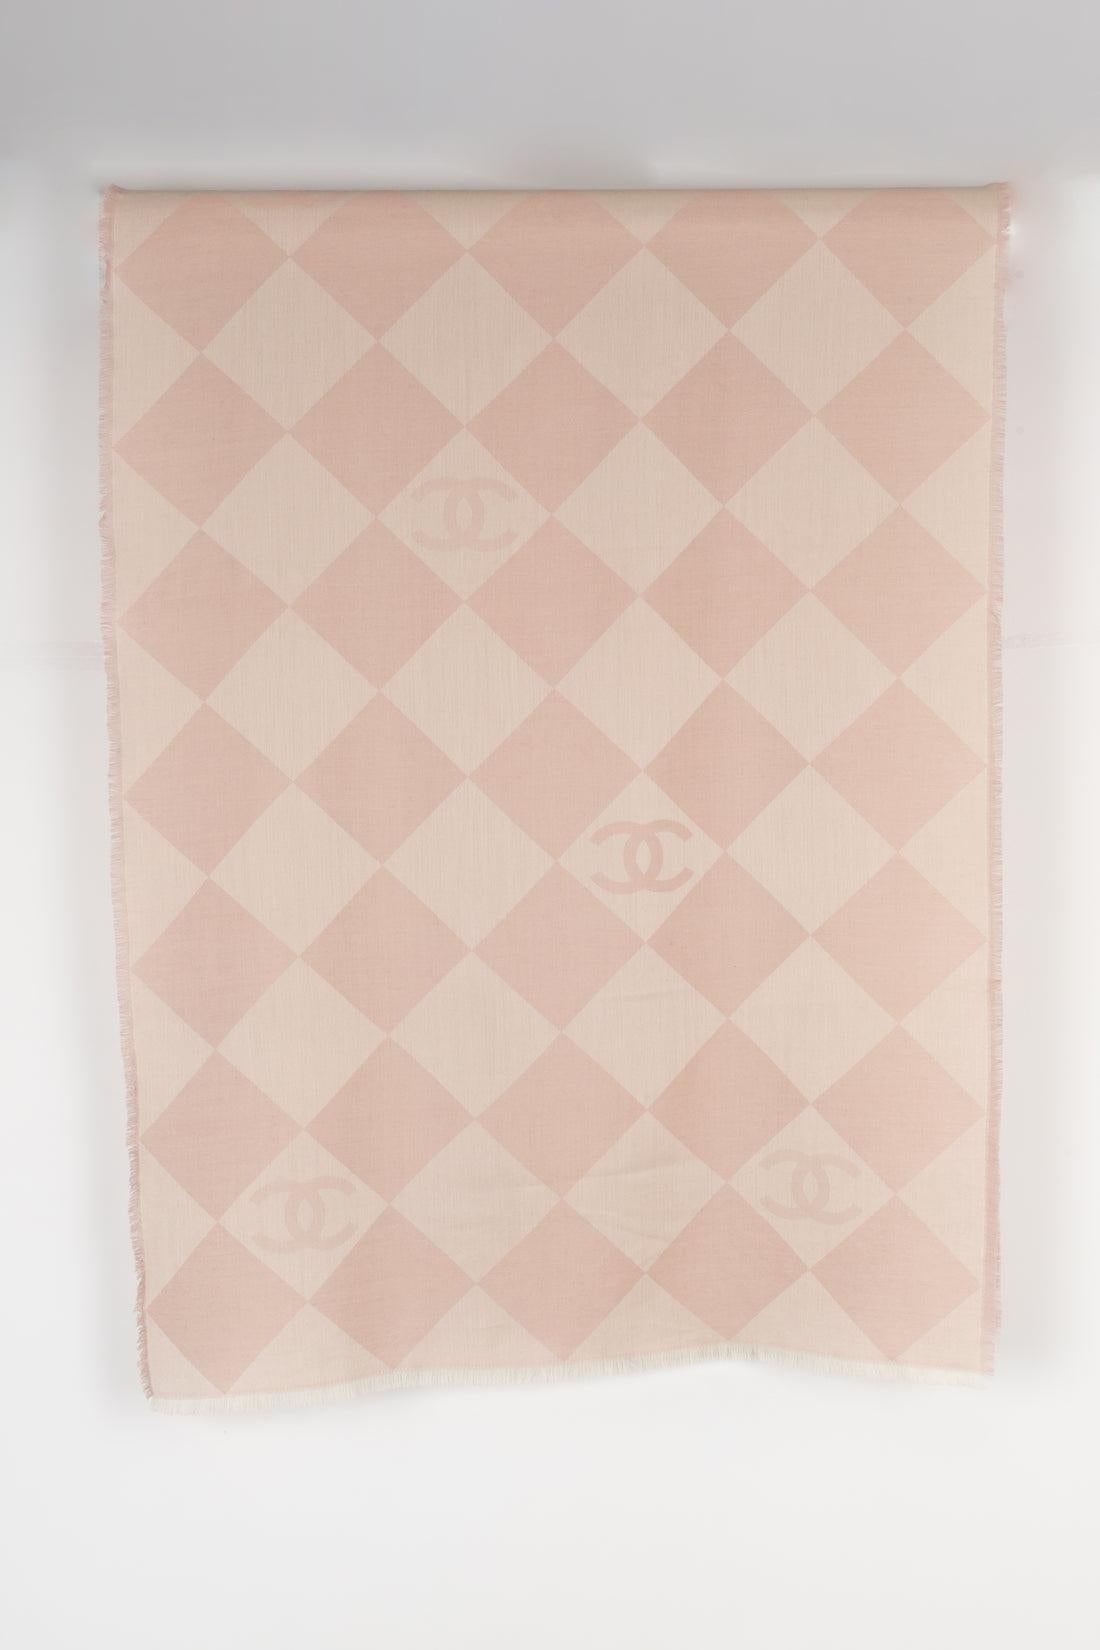 Women's Chanel Cashmere Stole in Pink Tones For Sale